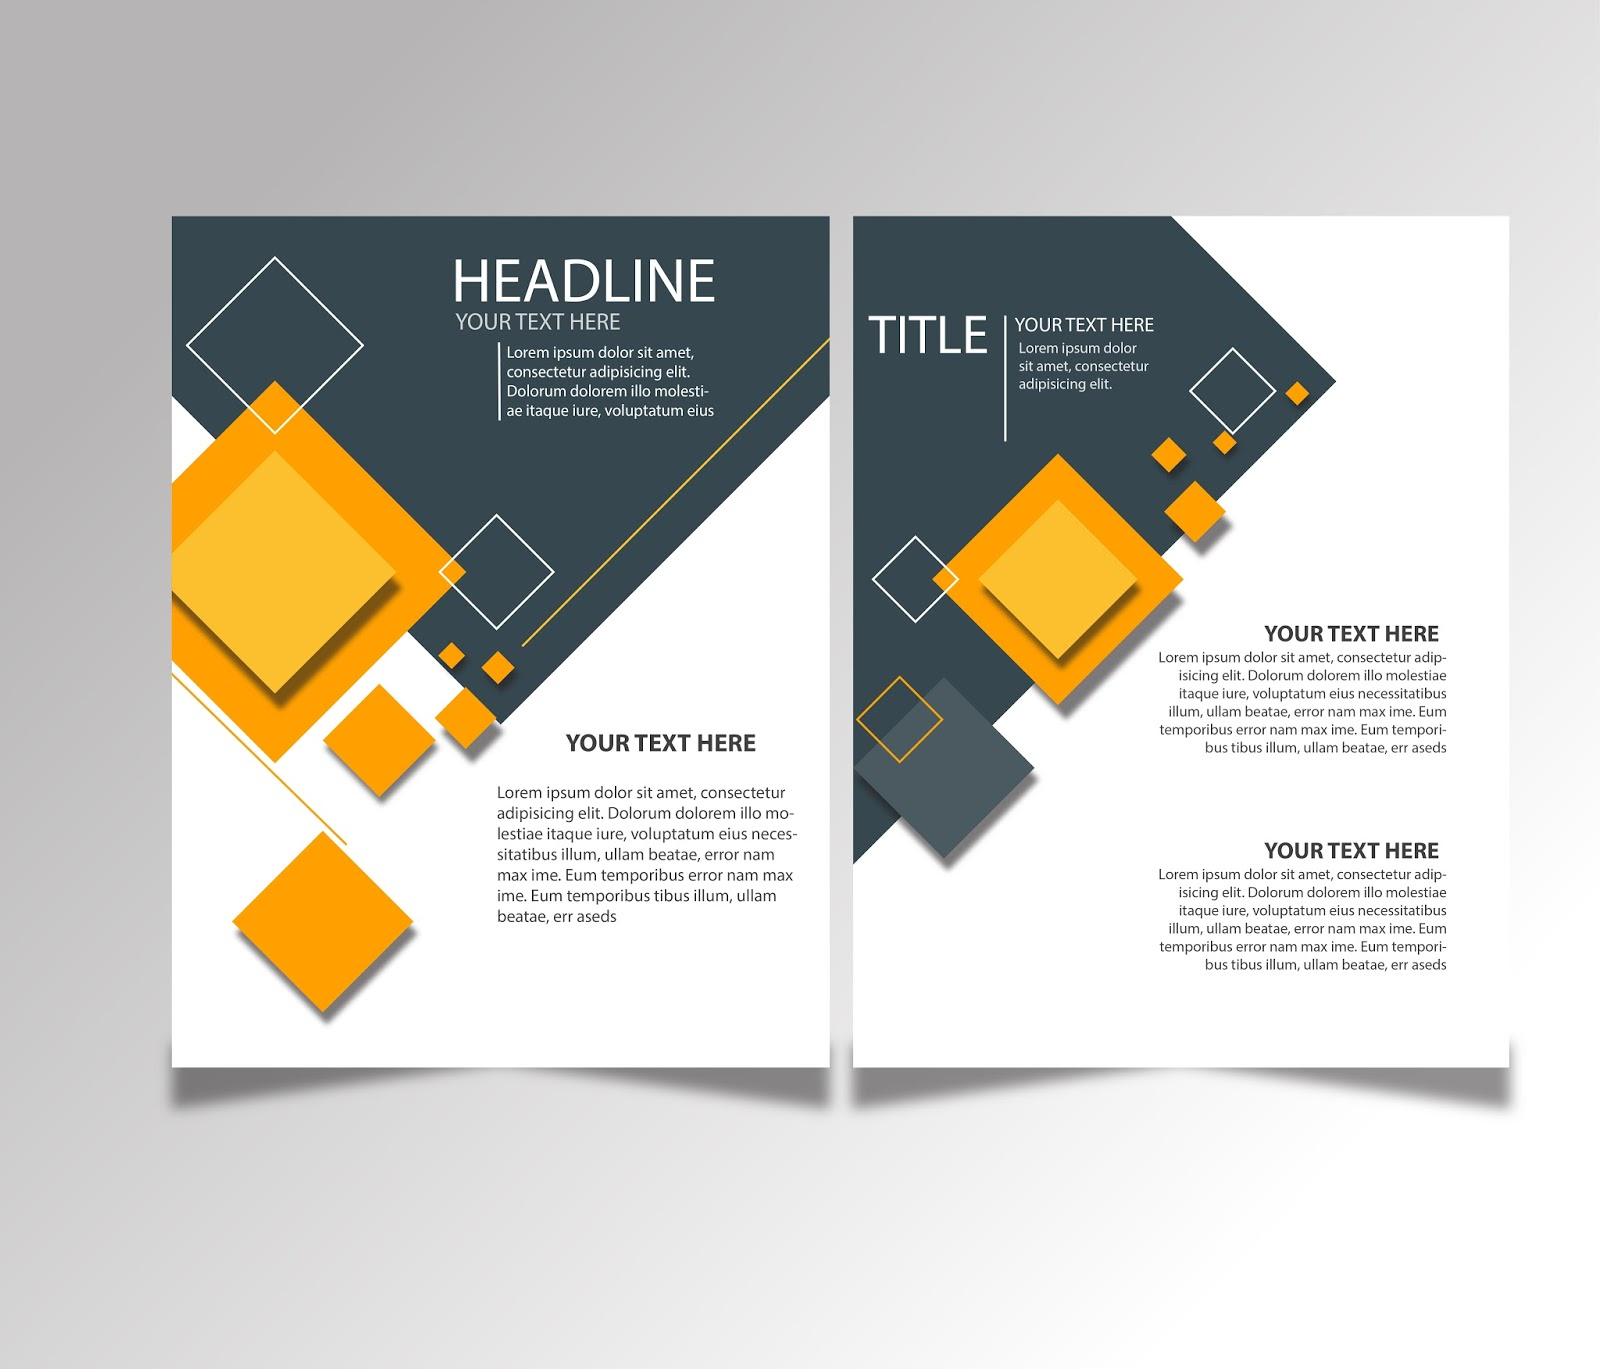 FREE DOWNLOAD BROCHURE DESIGN TEMPLATES AI FILES - Ideosprocess With Adobe Illustrator Brochure Templates Free Download